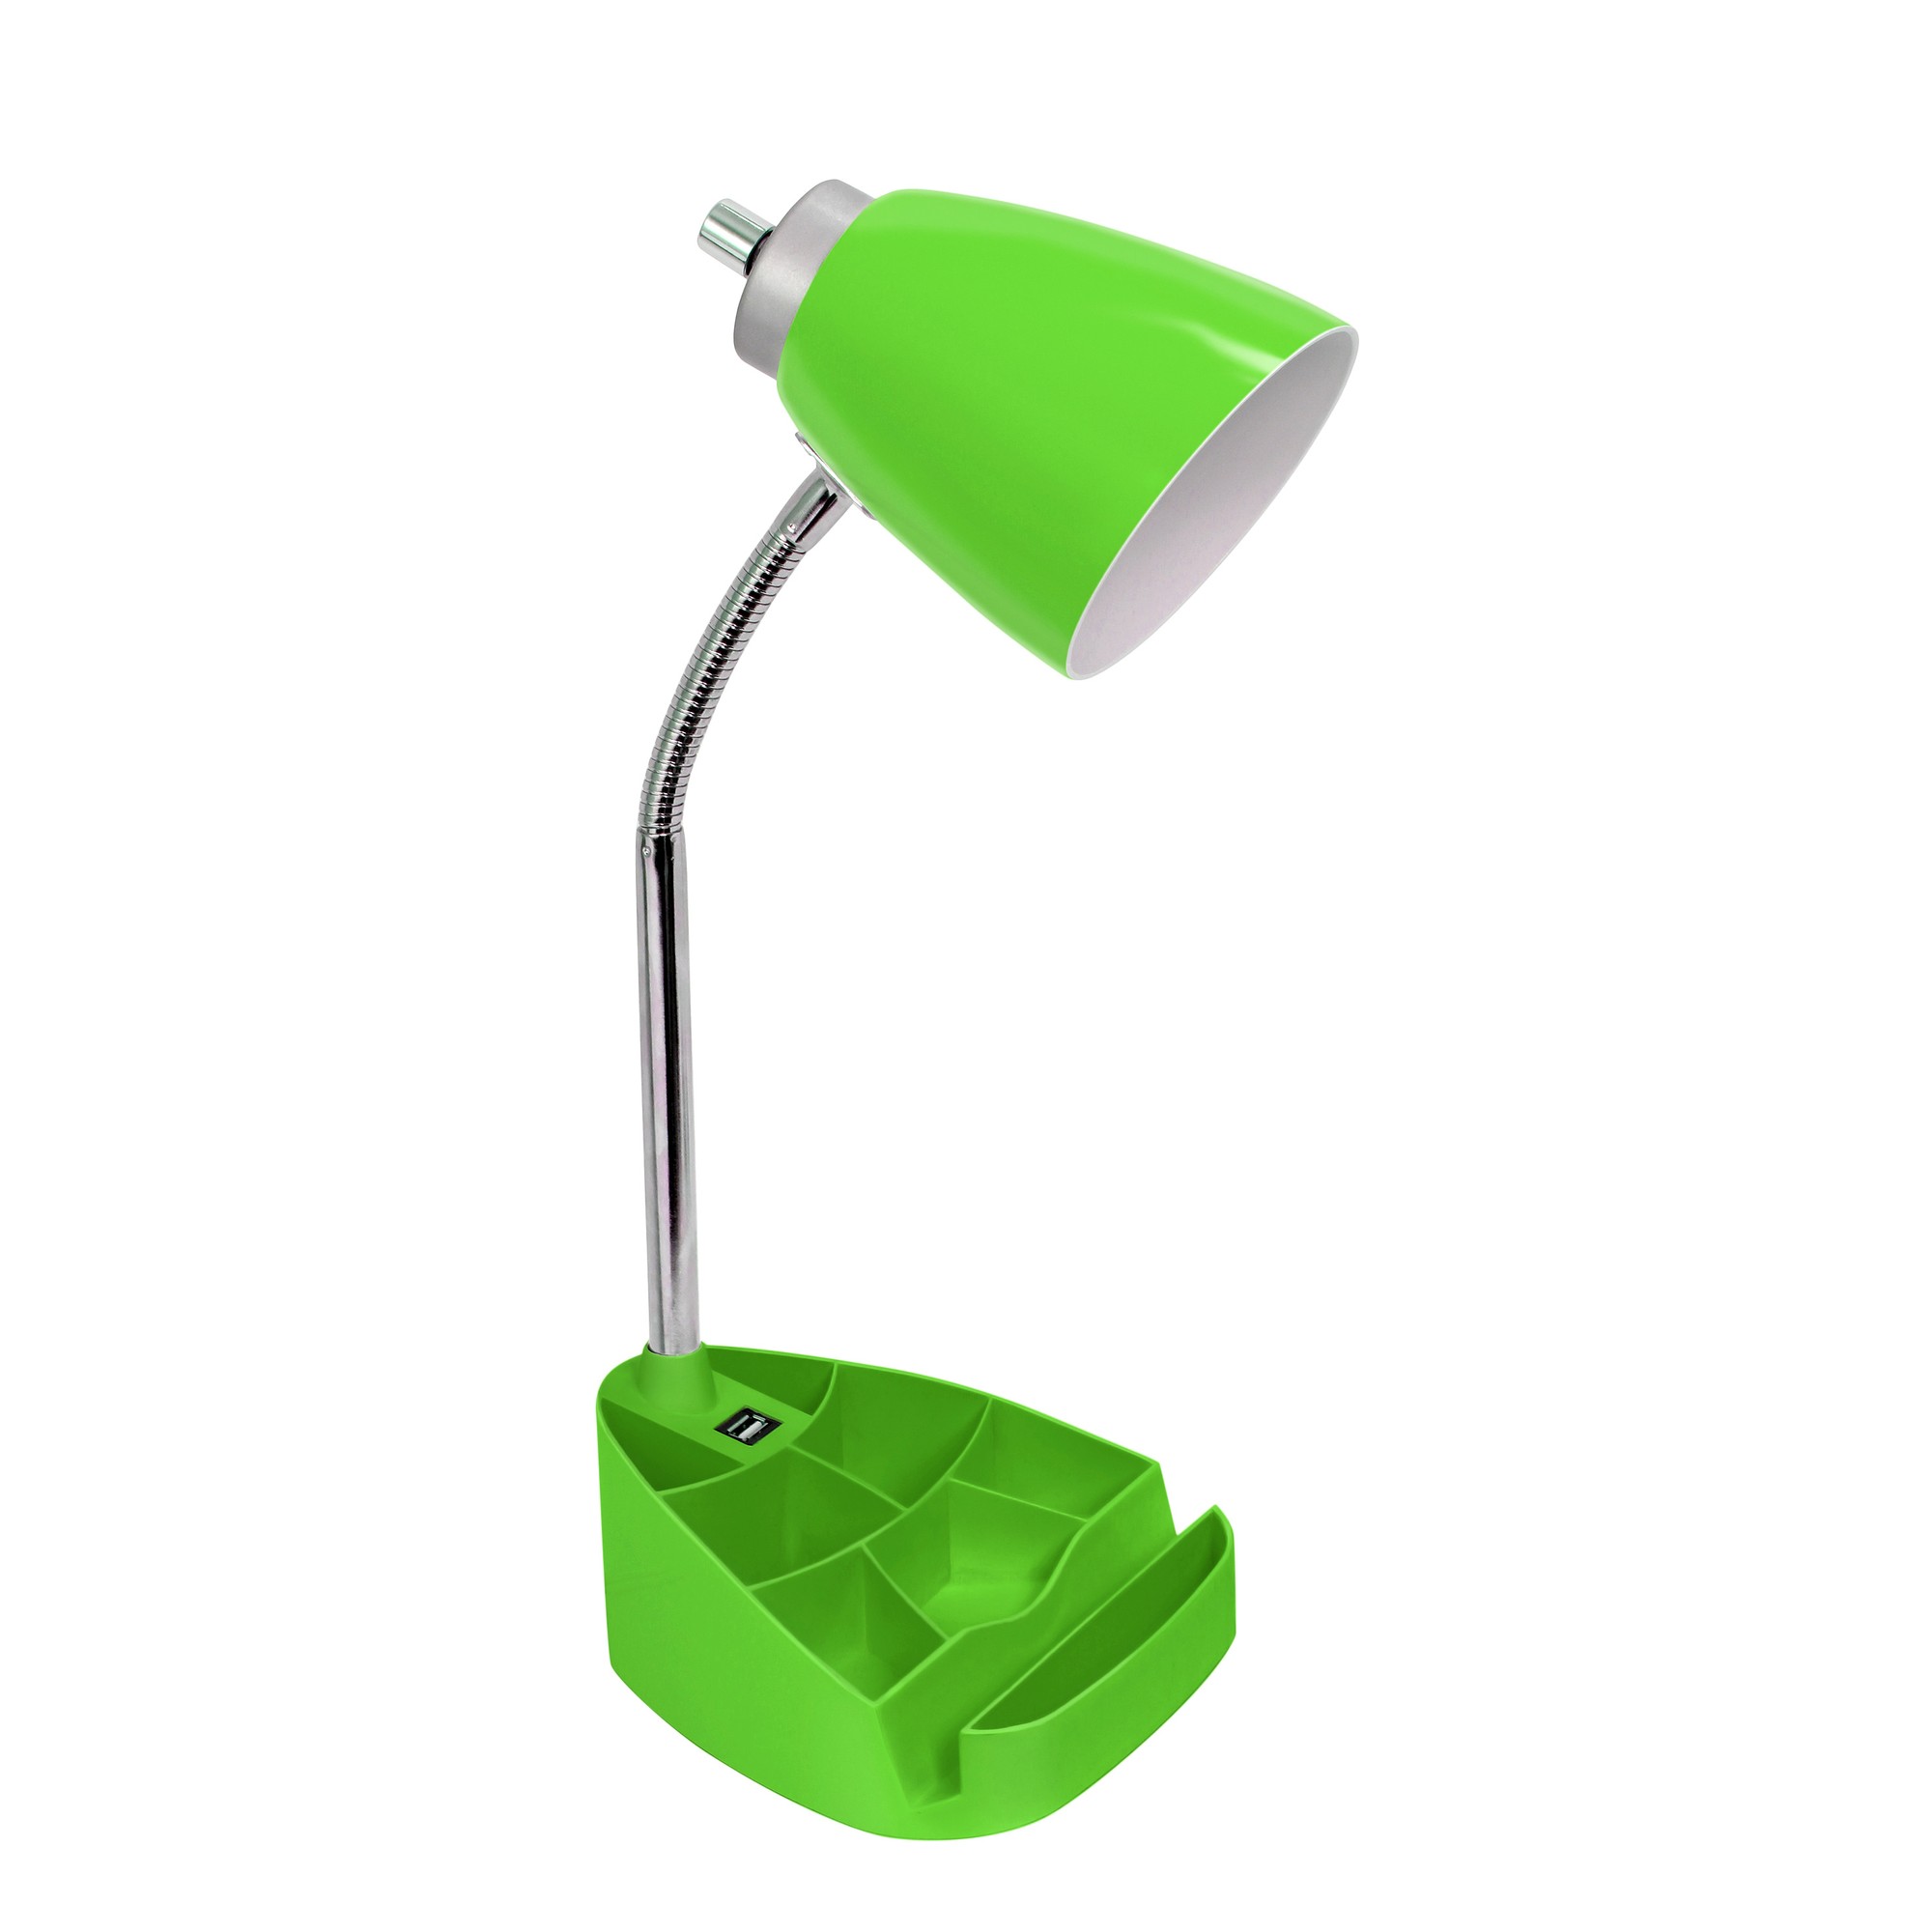 Simple Designs Gooseneck Organizer Desk Lamp with iPad Tablet Stand Book Holder and USB port, Green